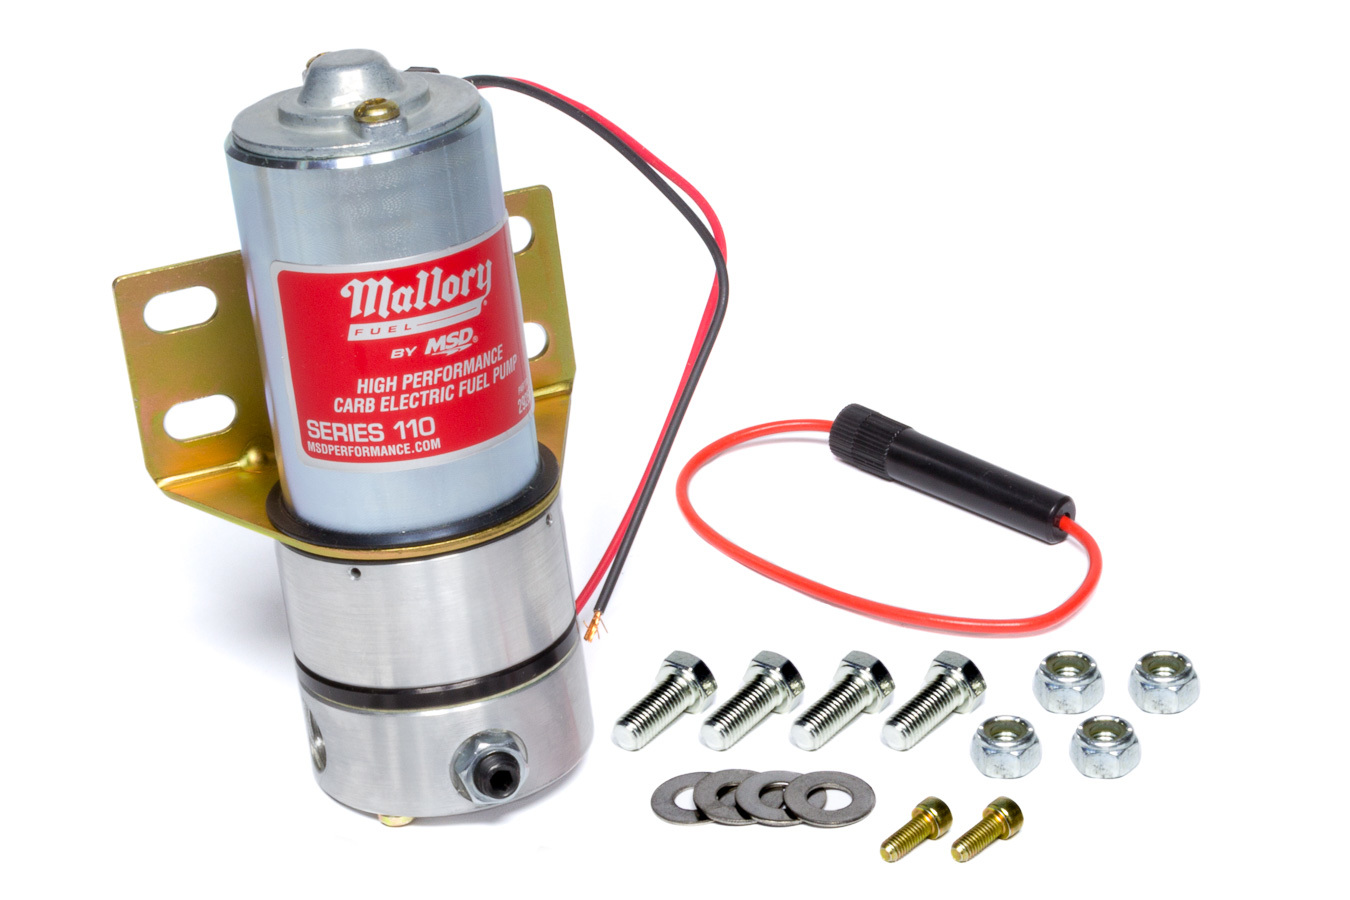 Mallory 29256 Fuel Pump, Comp Pump Series 110, Electric, In-Line, 110 gph at 7 psi at 12V, 3/8 in NPT Female Inlet / Outlet, Gas, Each